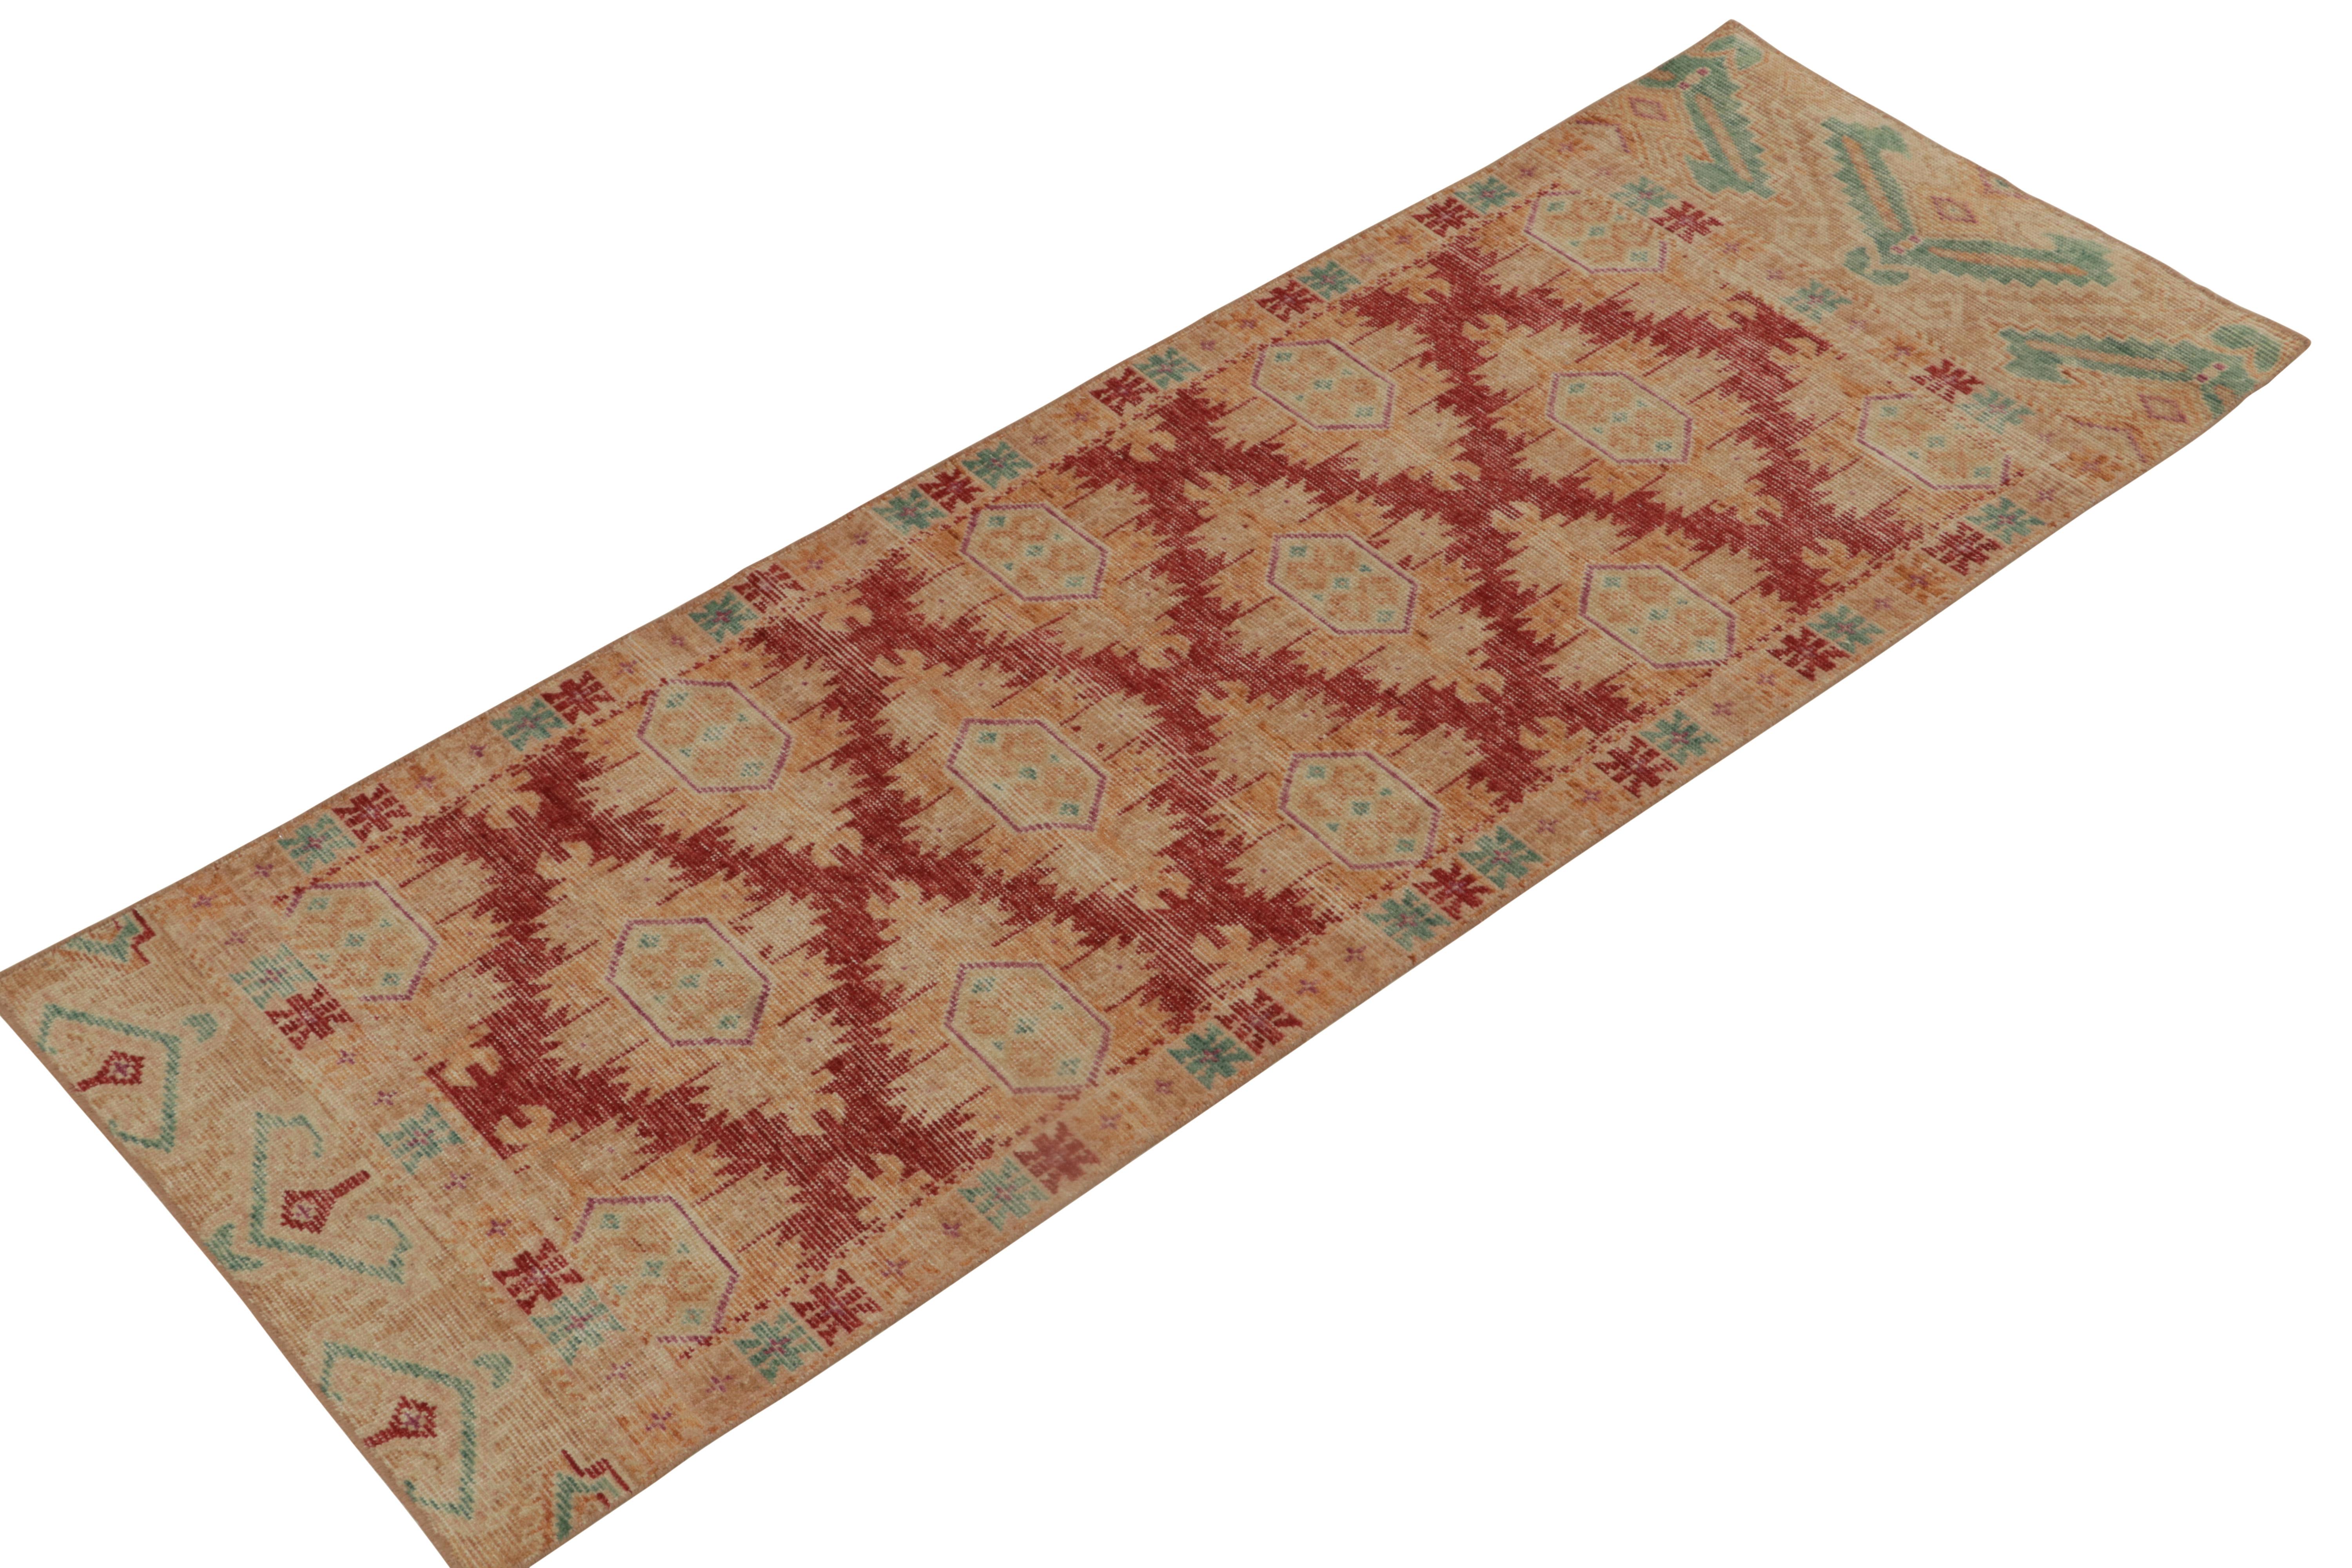 From Rug & Kilim’s Homage Collection, this 3x8 hand-knotted wool runner recaptures the aesthetics of turn-of-the-century antique Bokhara rugs; a celebrated caucasian tribal provenance revered for lively hues and graphic geometric patterns.

The